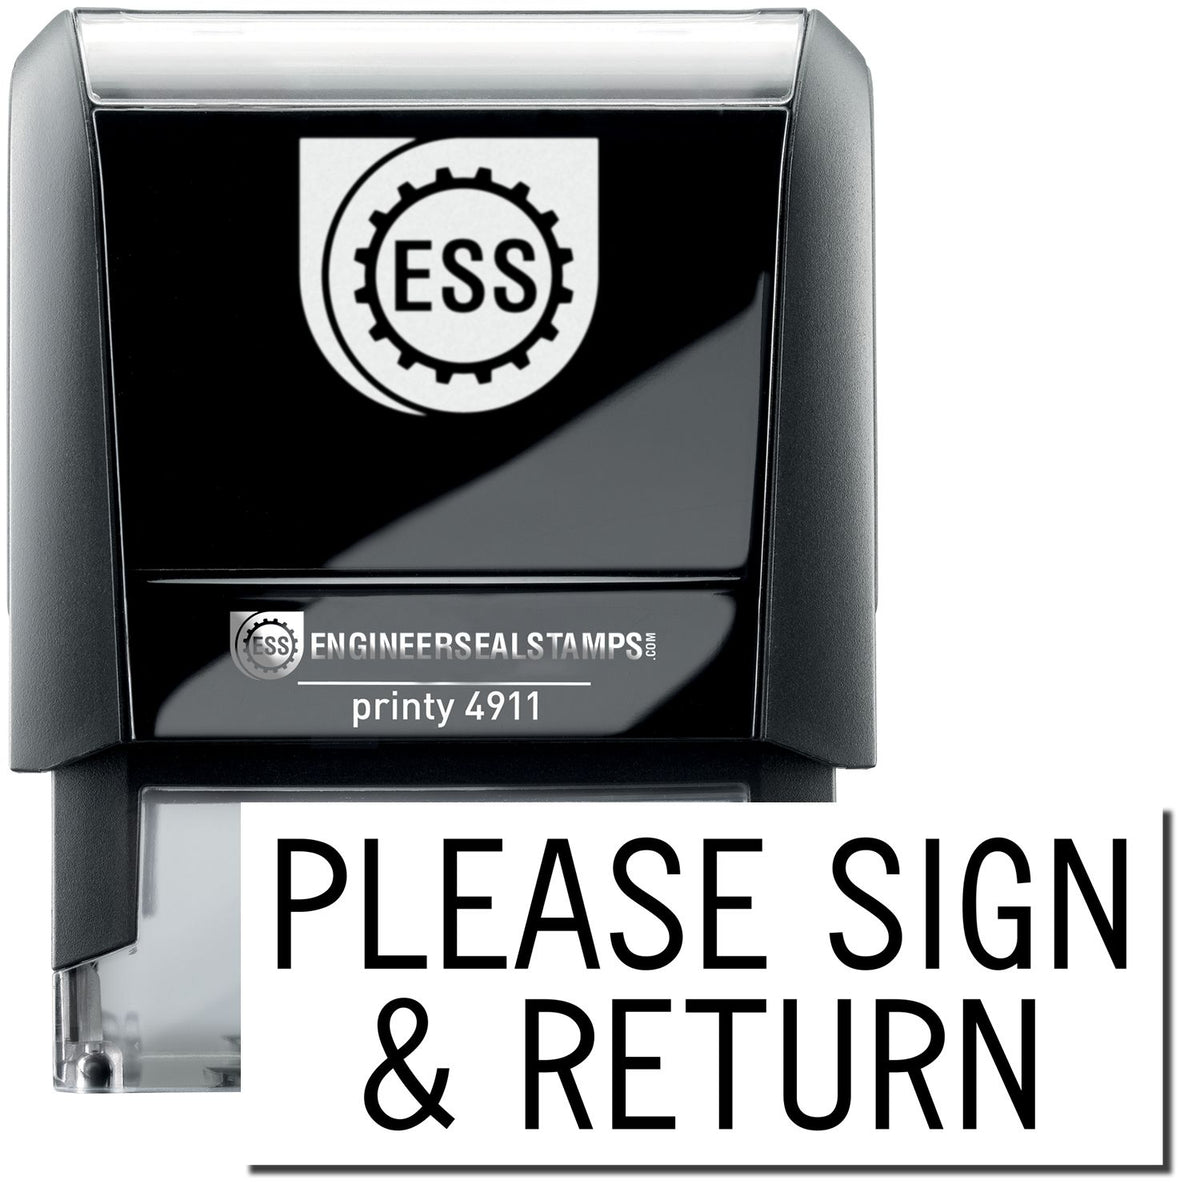 A self-inking stamp with a stamped image showing how the text &quot;PLEASE SIGN &amp; RETURN&quot; is displayed after stamping.